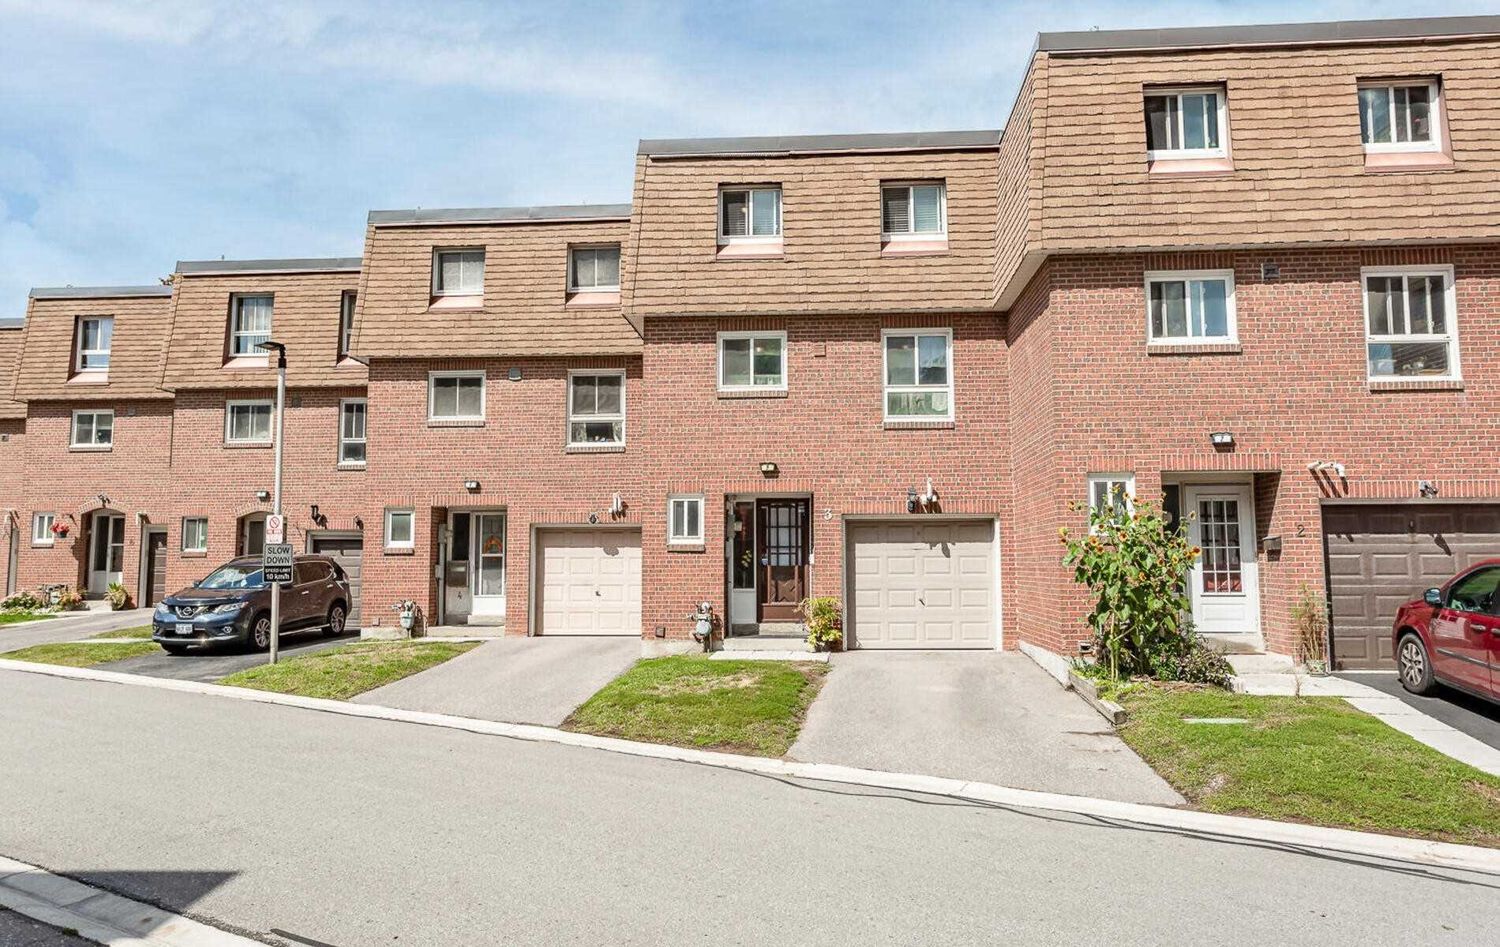 2-90 Crockamhill Drive. Crockamhill Drive Townhomes is located in  Scarborough, Toronto - image #1 of 2